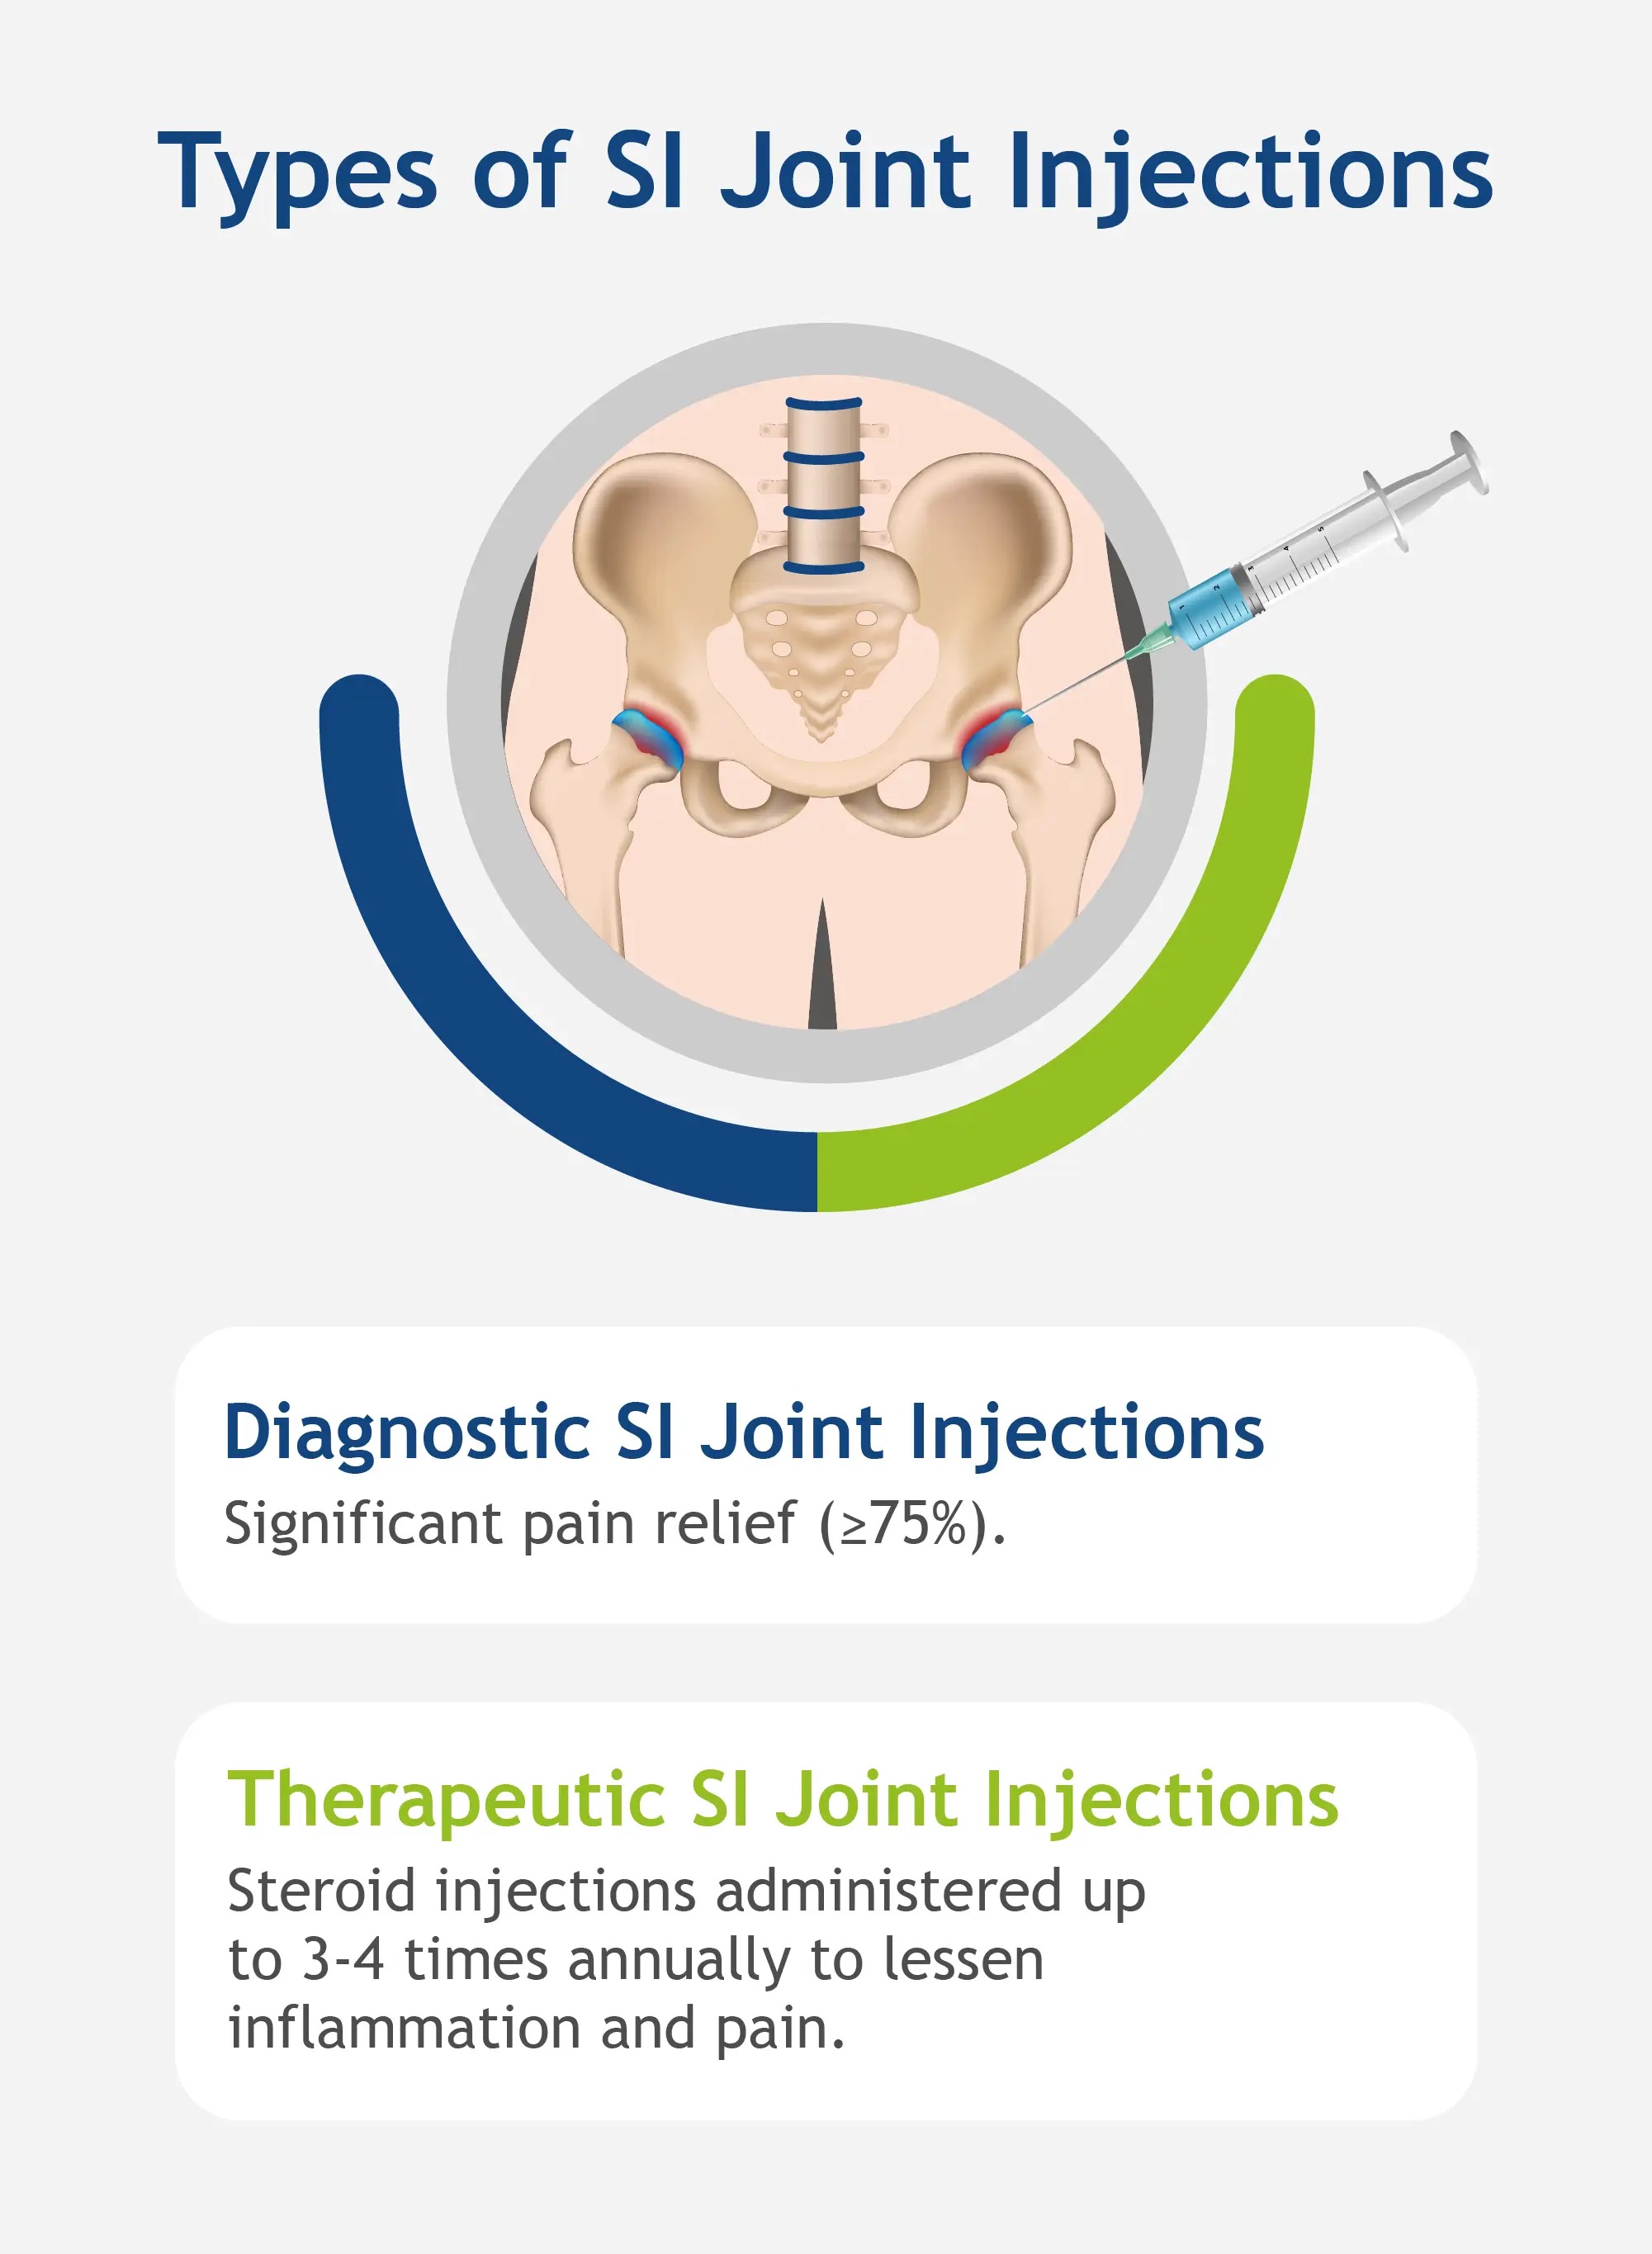 An infographic describing different types of SI joint injections.